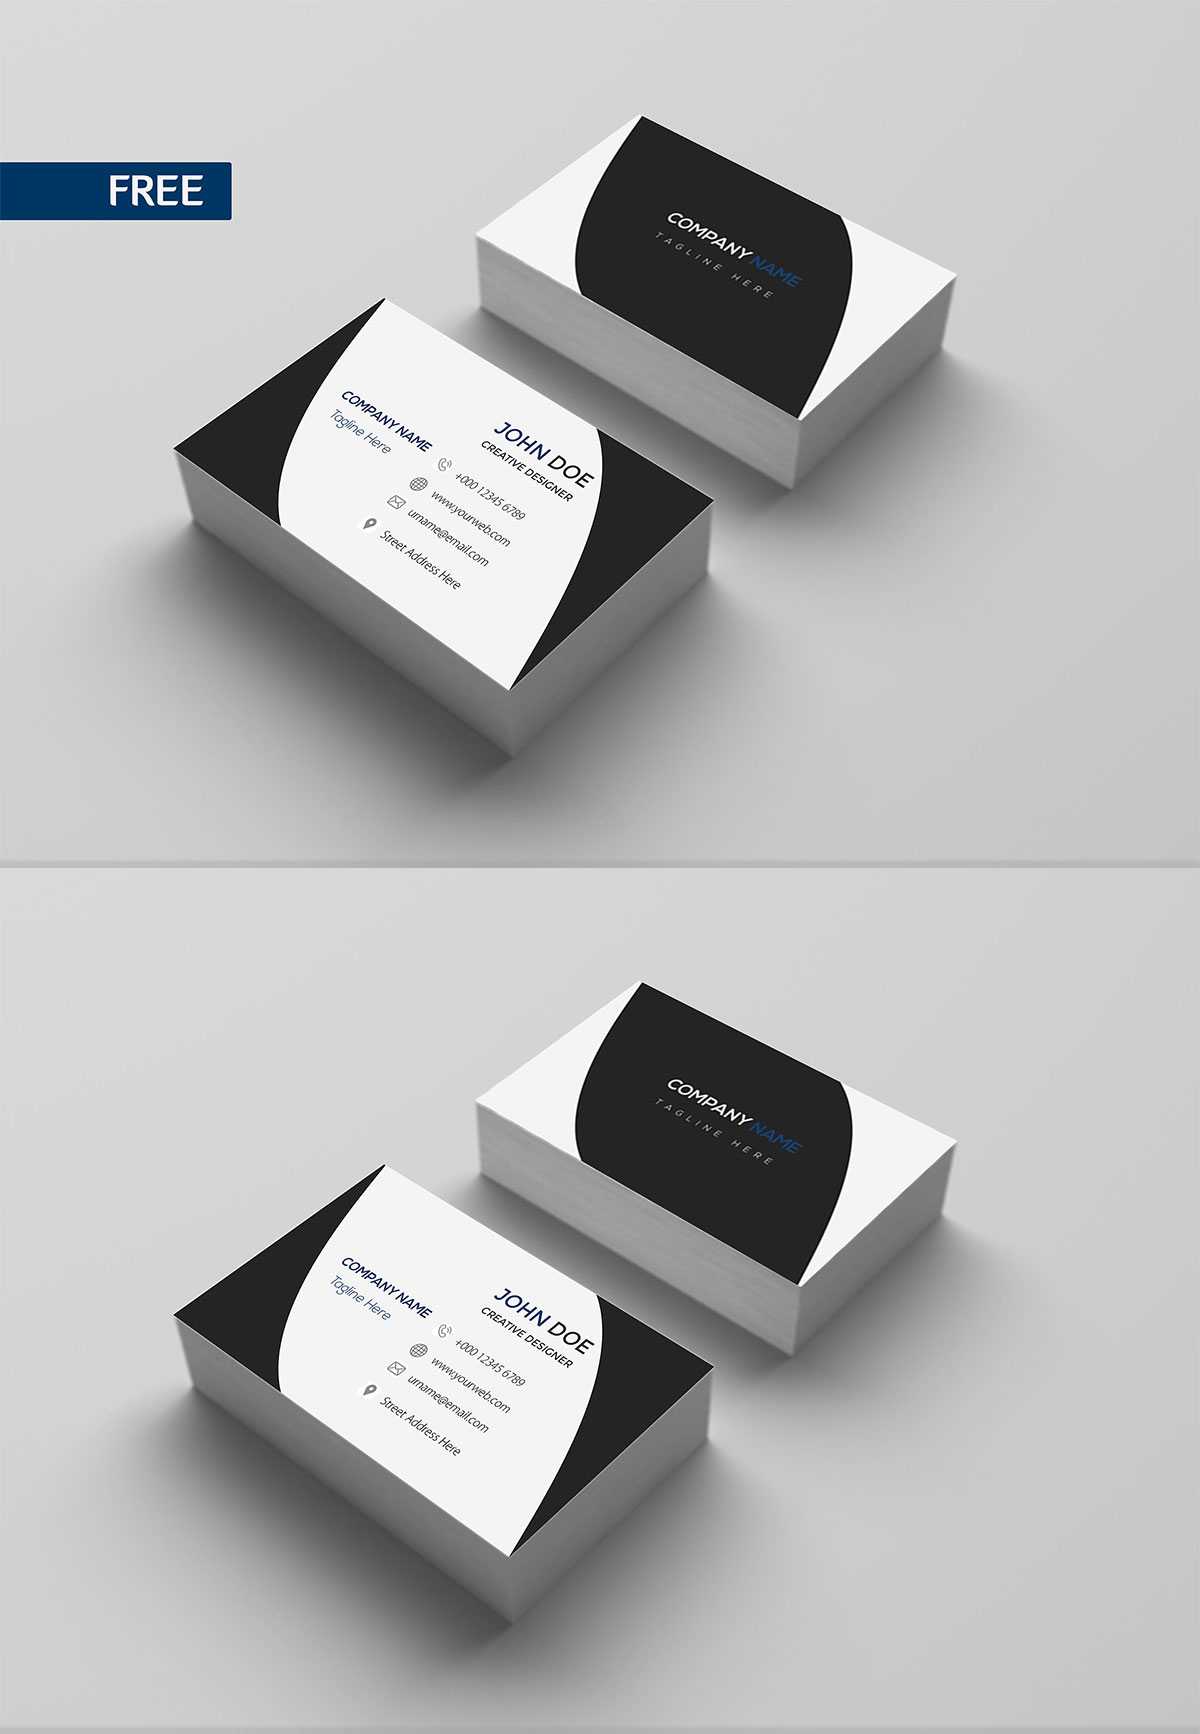 Free Print Design Business Card Template – Creativetacos Within Free Templates For Cards Print